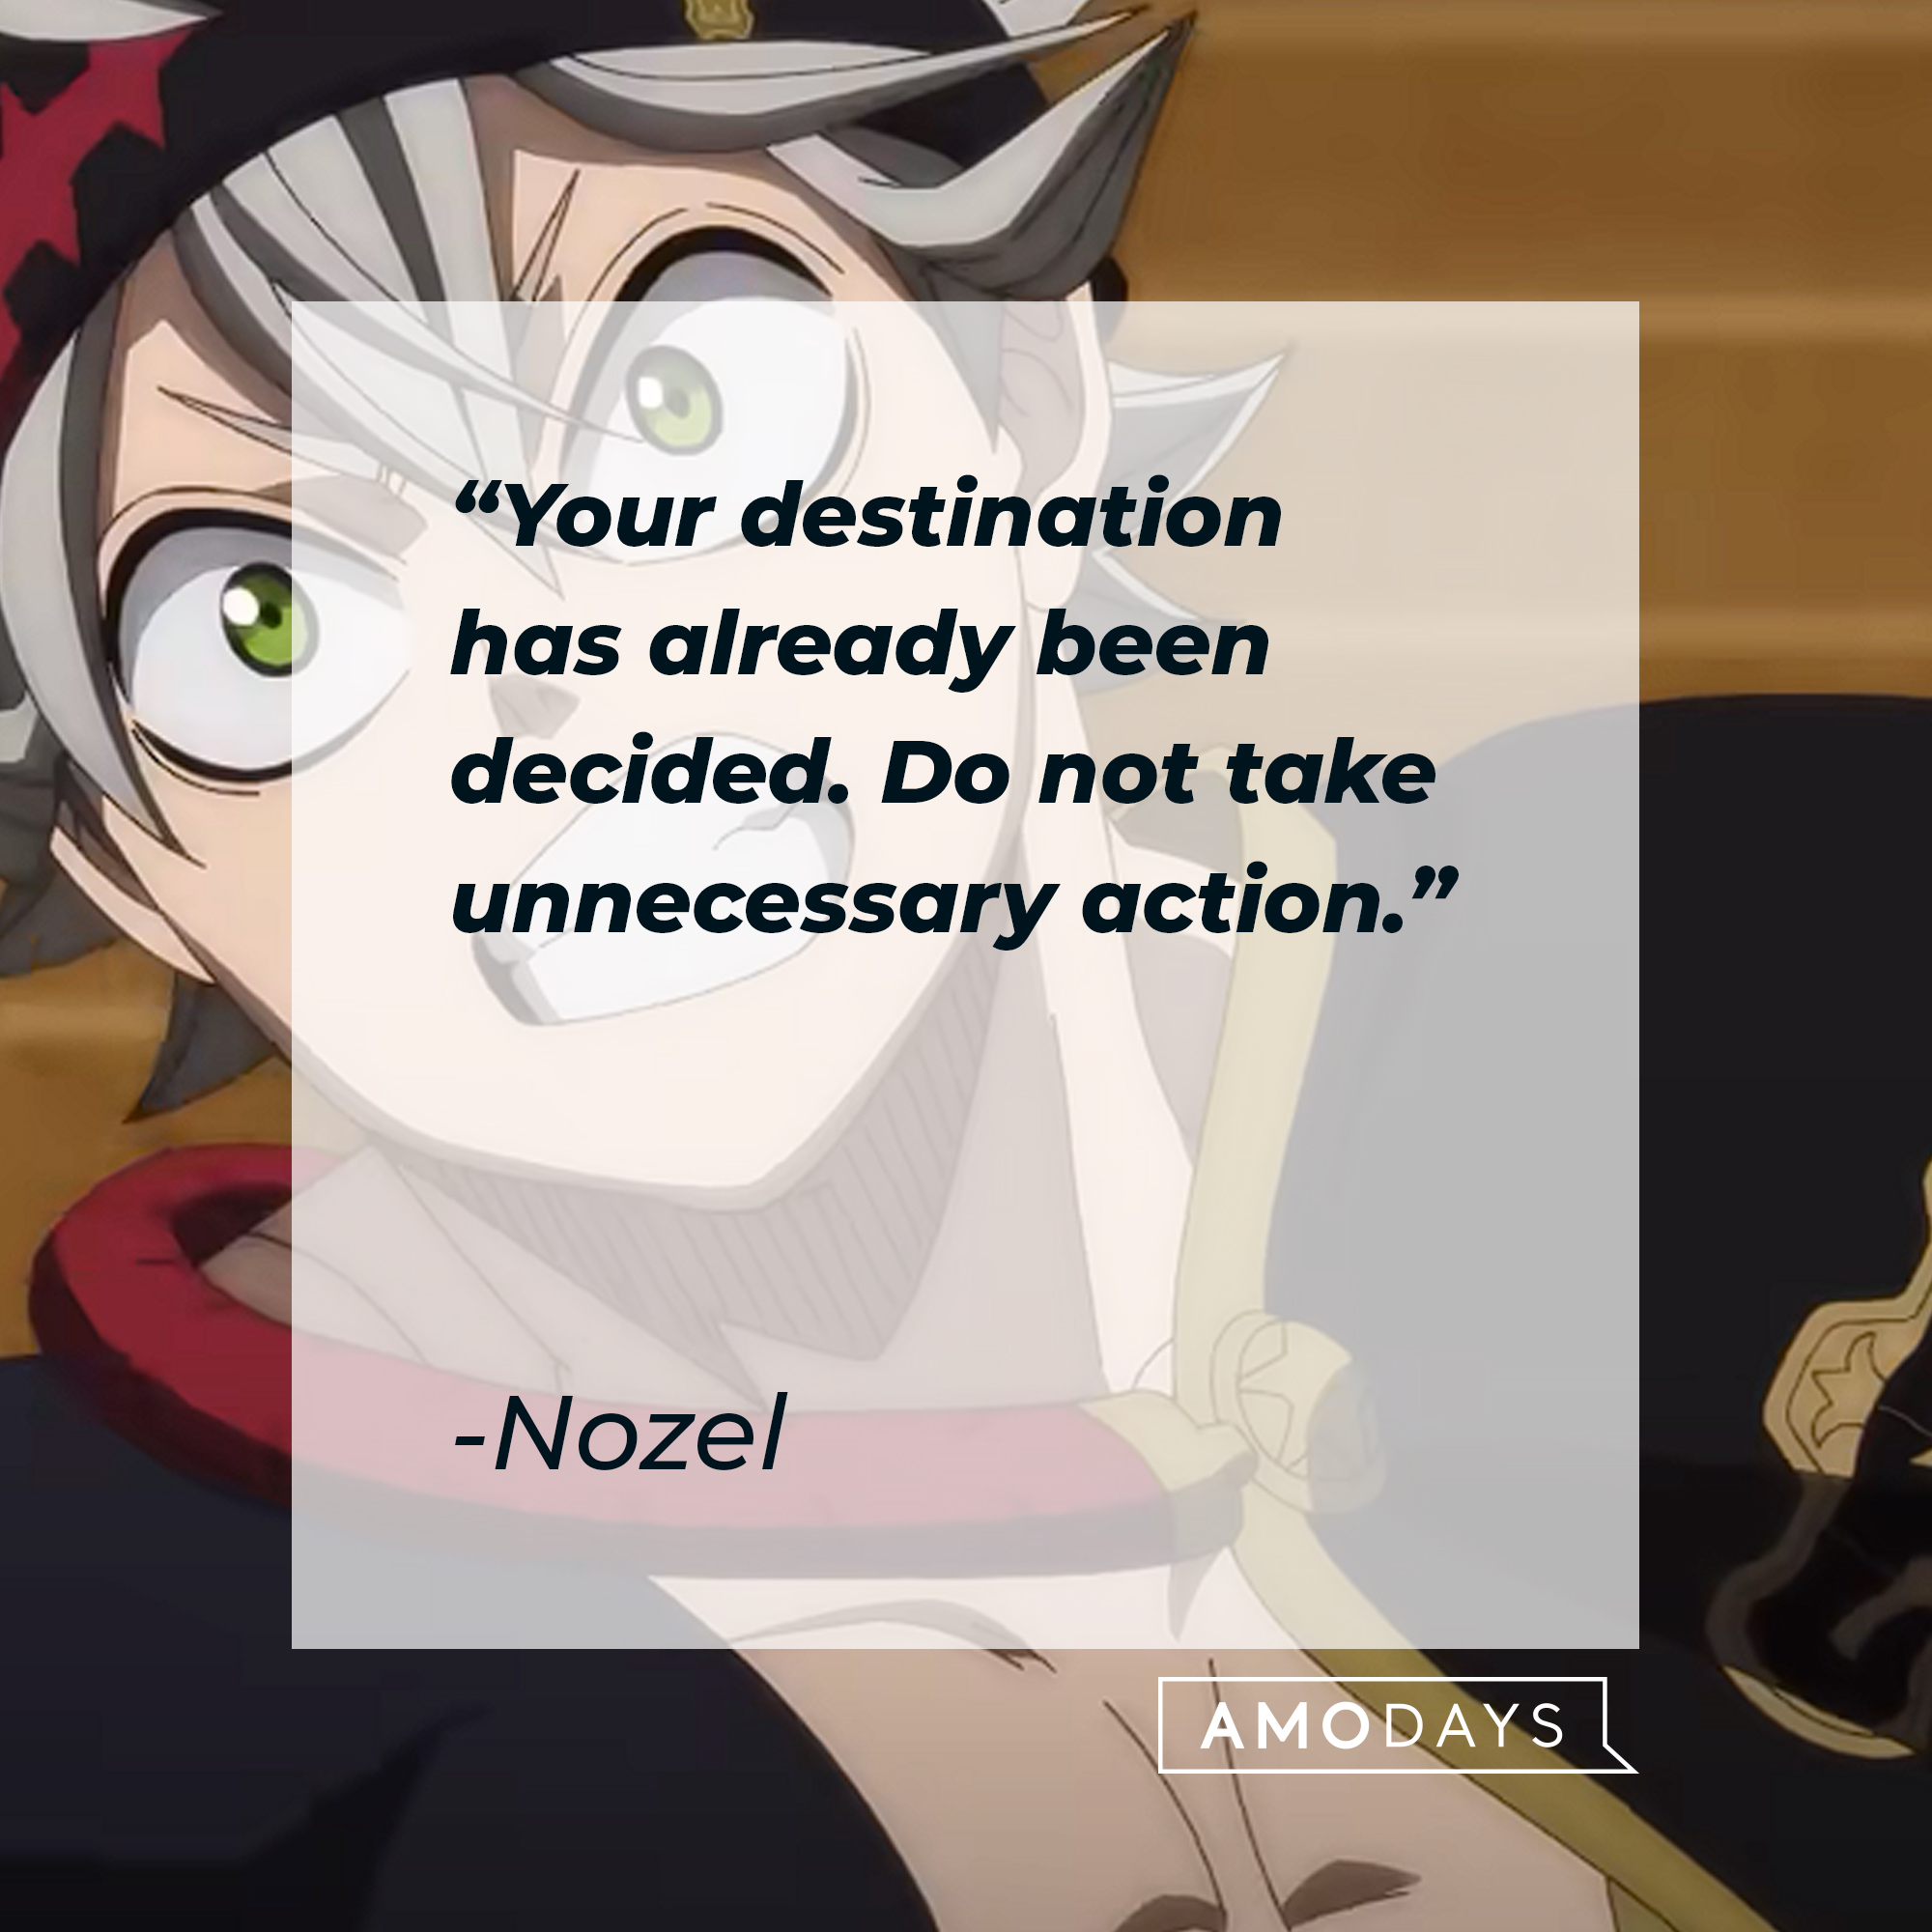 An image of Nozel with his quote: “Your destination has already been decided. Do not take unnecessary action.” | Source: youtube/netflixanime